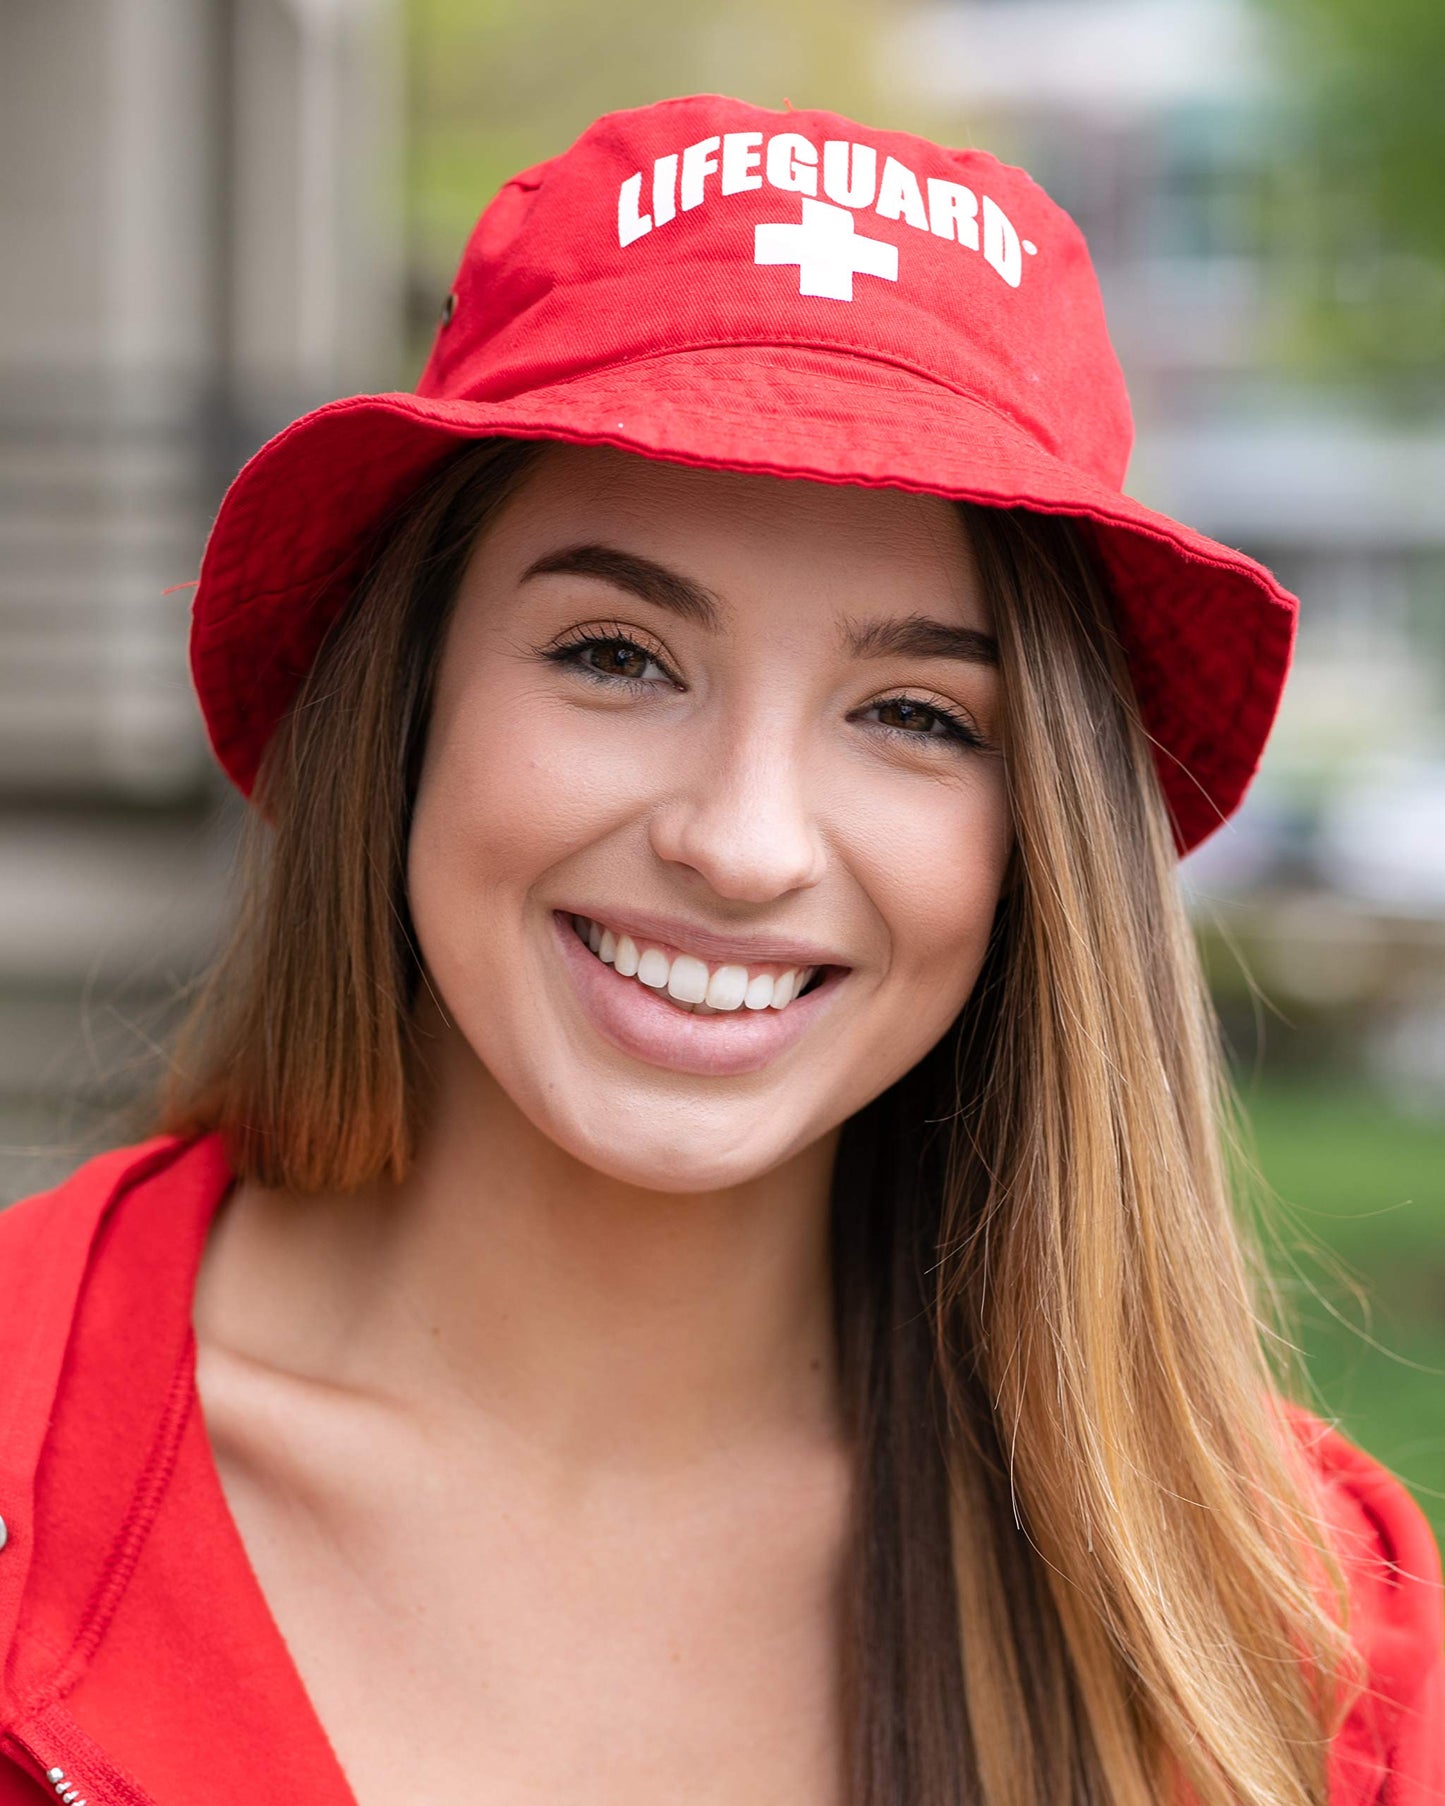 LIFEGUARD Officially Licensed Red Bucket Hat for Men & Women, Unisex Soft Cotton for Sun Beach Pool